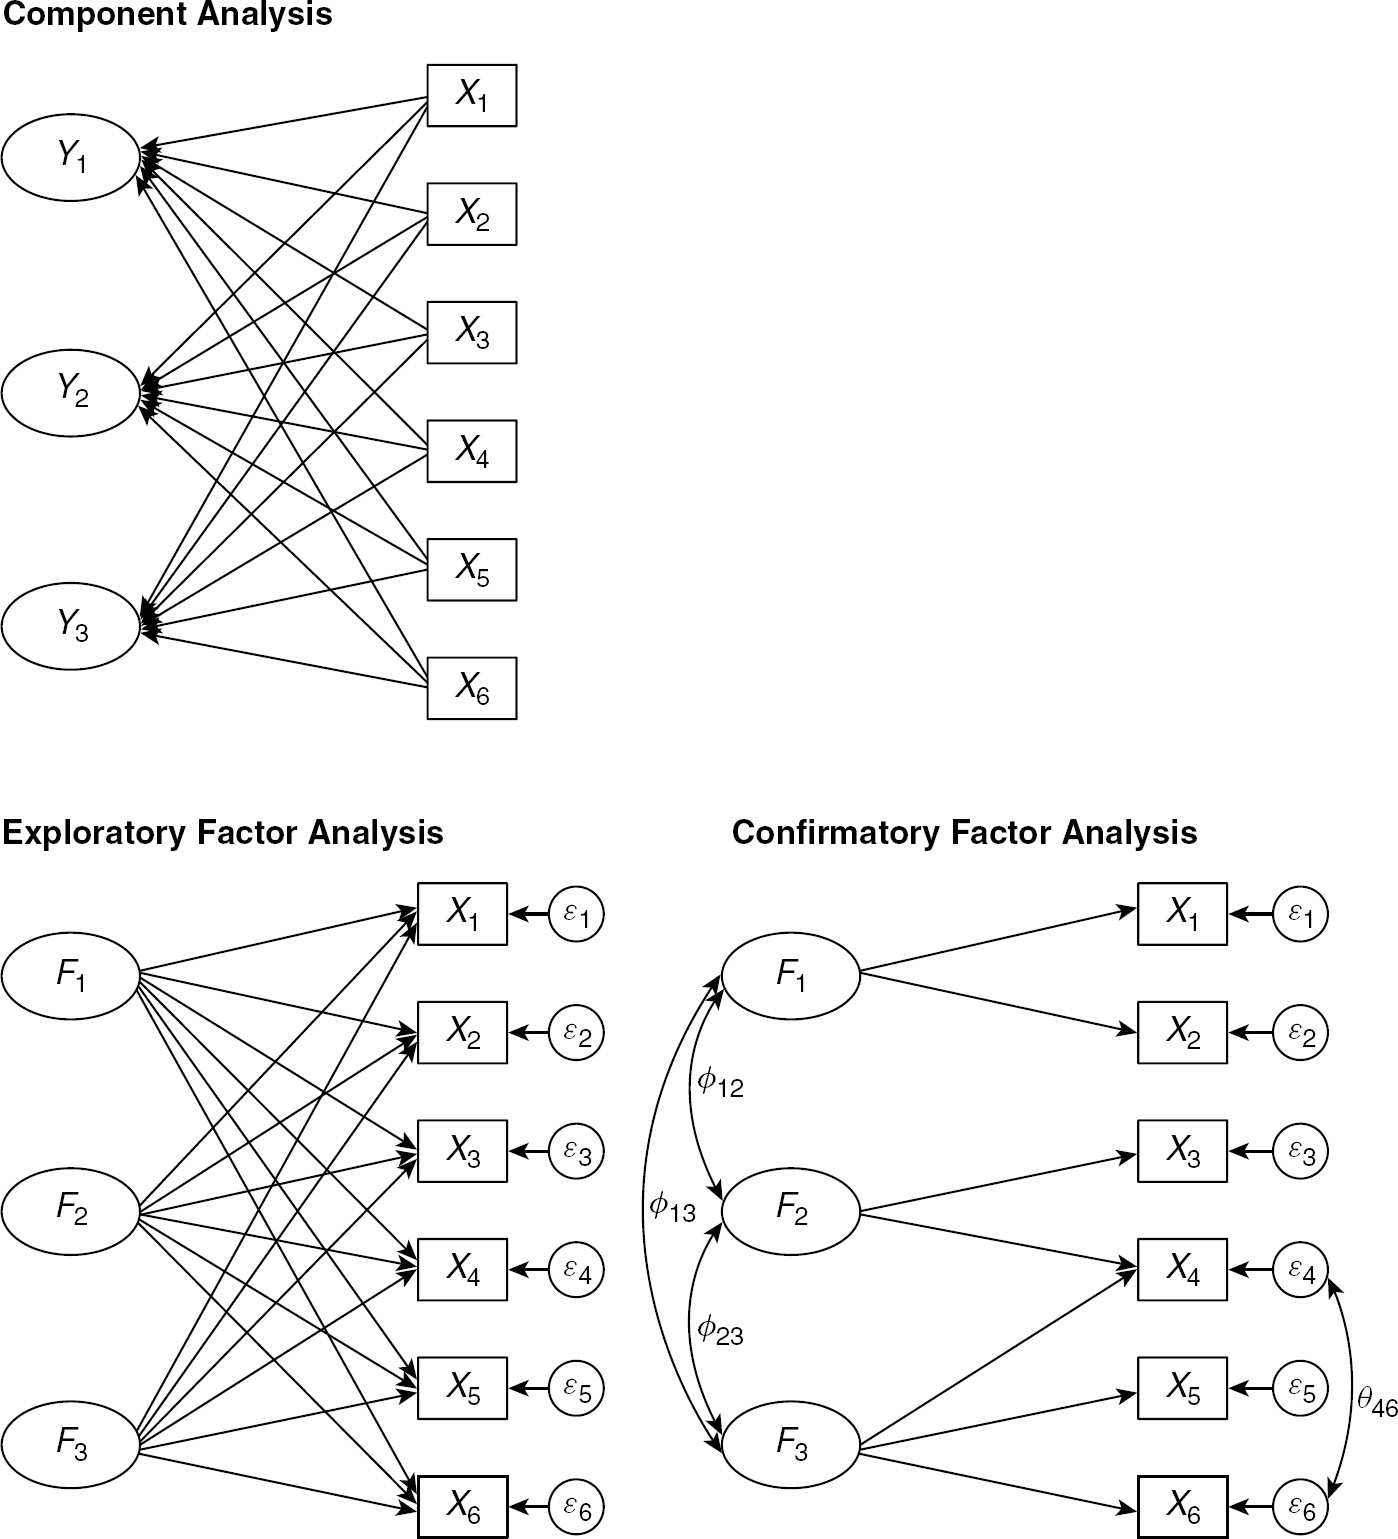 Fit Indices to Report for Confirmatory Factor Analysis and Structural  Equation Modelling, by Samuel Wandeto - Datapott Analytics